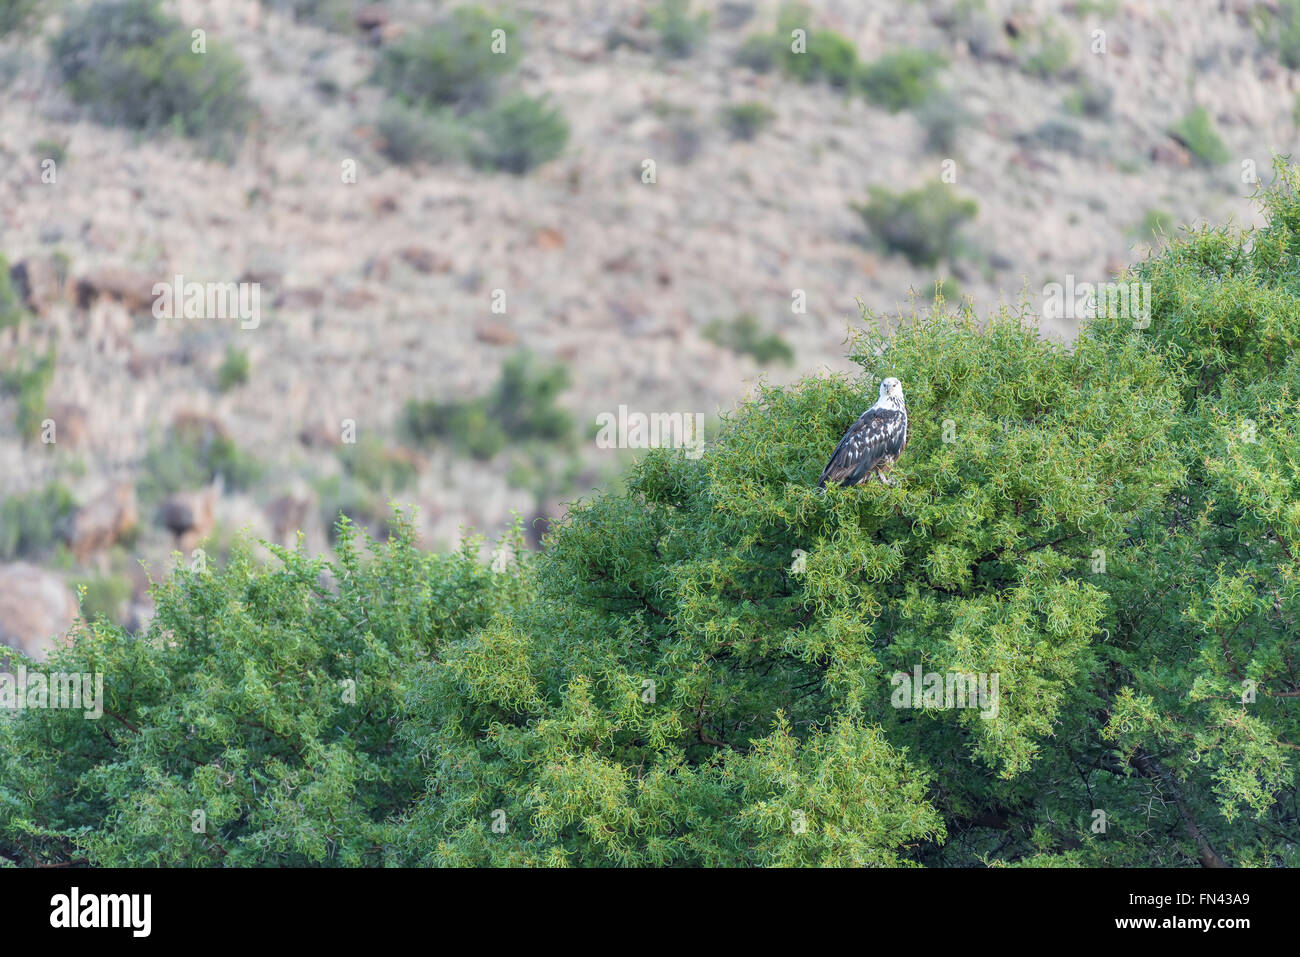 A juvenile fish eagle in a tree at the Doornhoek dam in the Mountain Zebra National Park near Cradock in South Africa Stock Photo